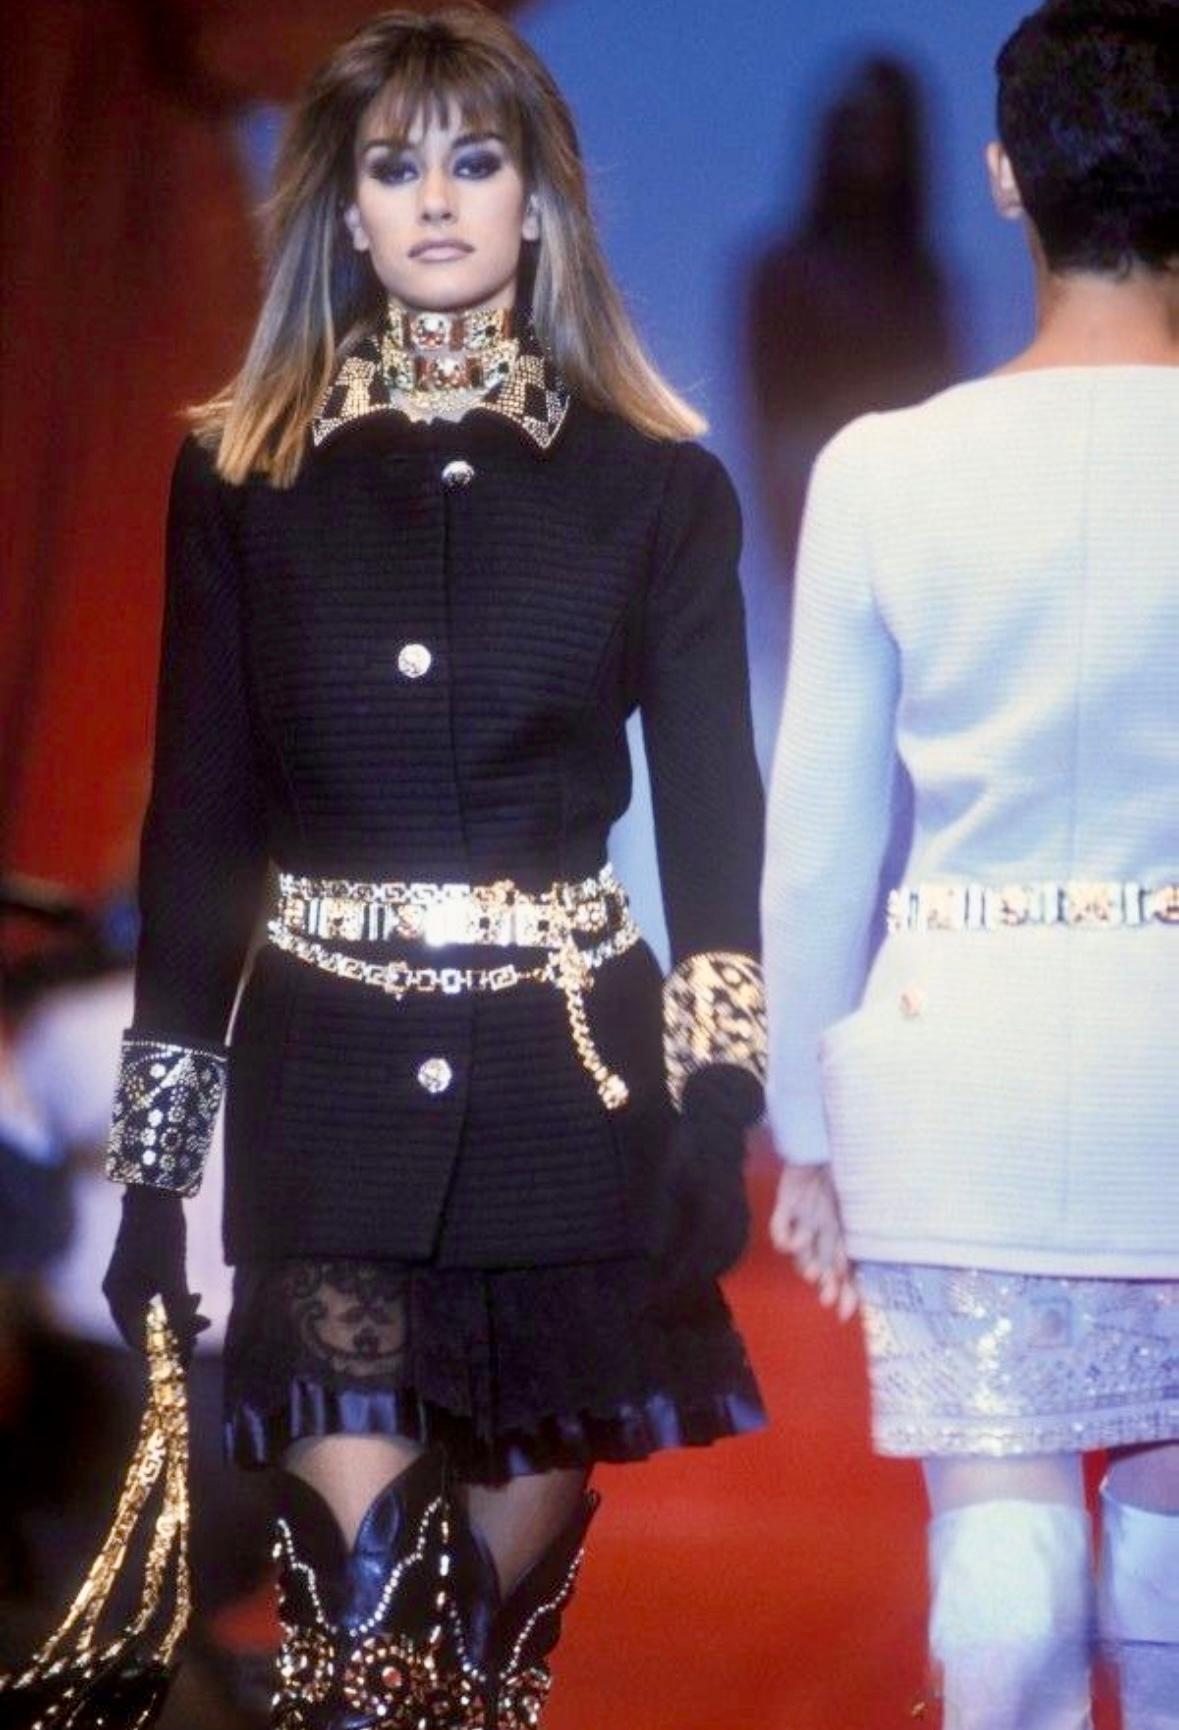 Introducing a stunning black quilted wool jacket from Atelier Versace, designed by Gianni Versace for the Fall/Winter 1991 Haute Couture collection. This beautifully crafted, custom handmade jacket made its debut on the season's runway, modeled by